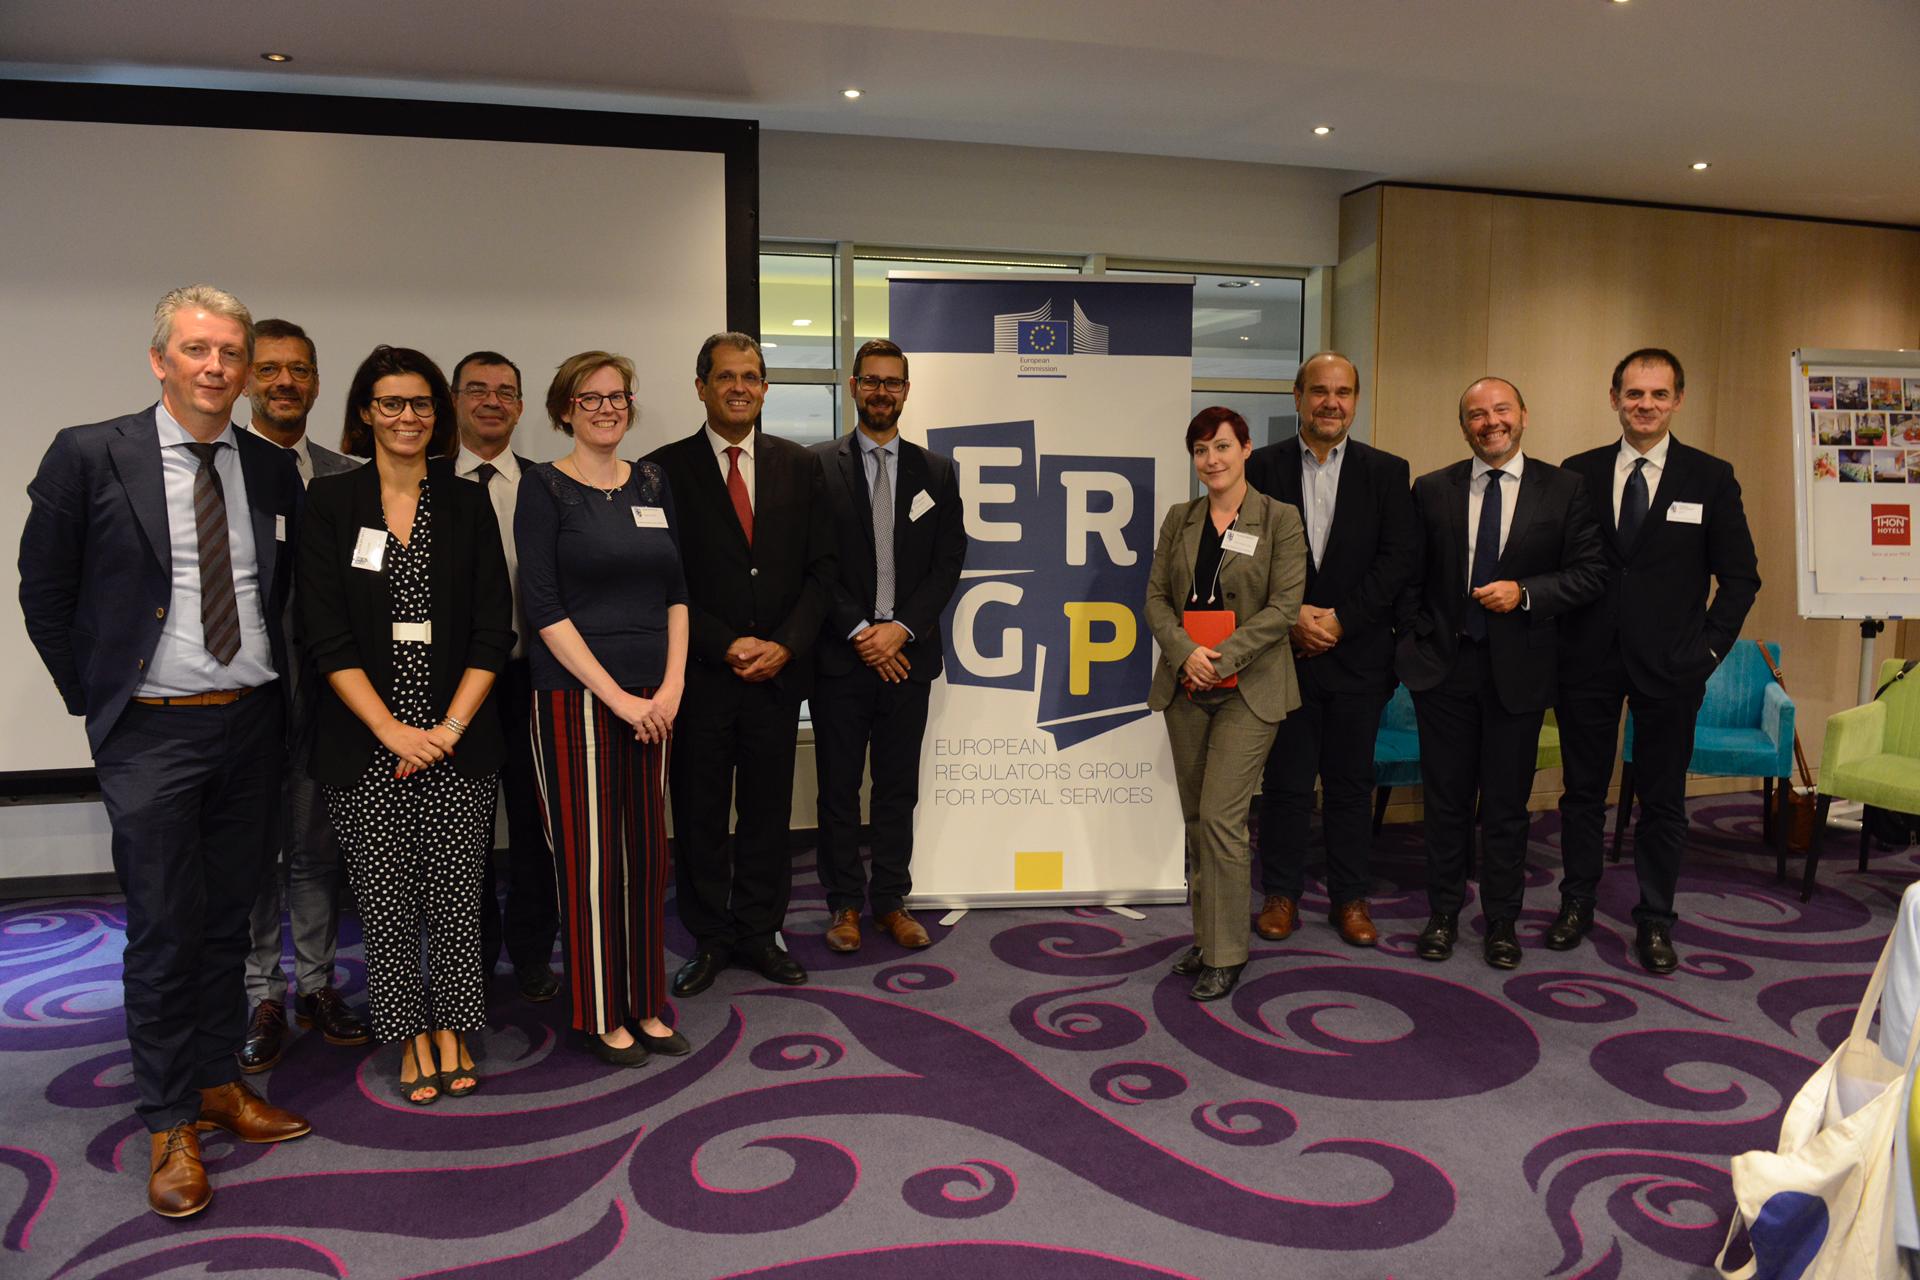 The Chair and Vice-Chairs of the ERGP and their teams with some representatives of Uniglobal.